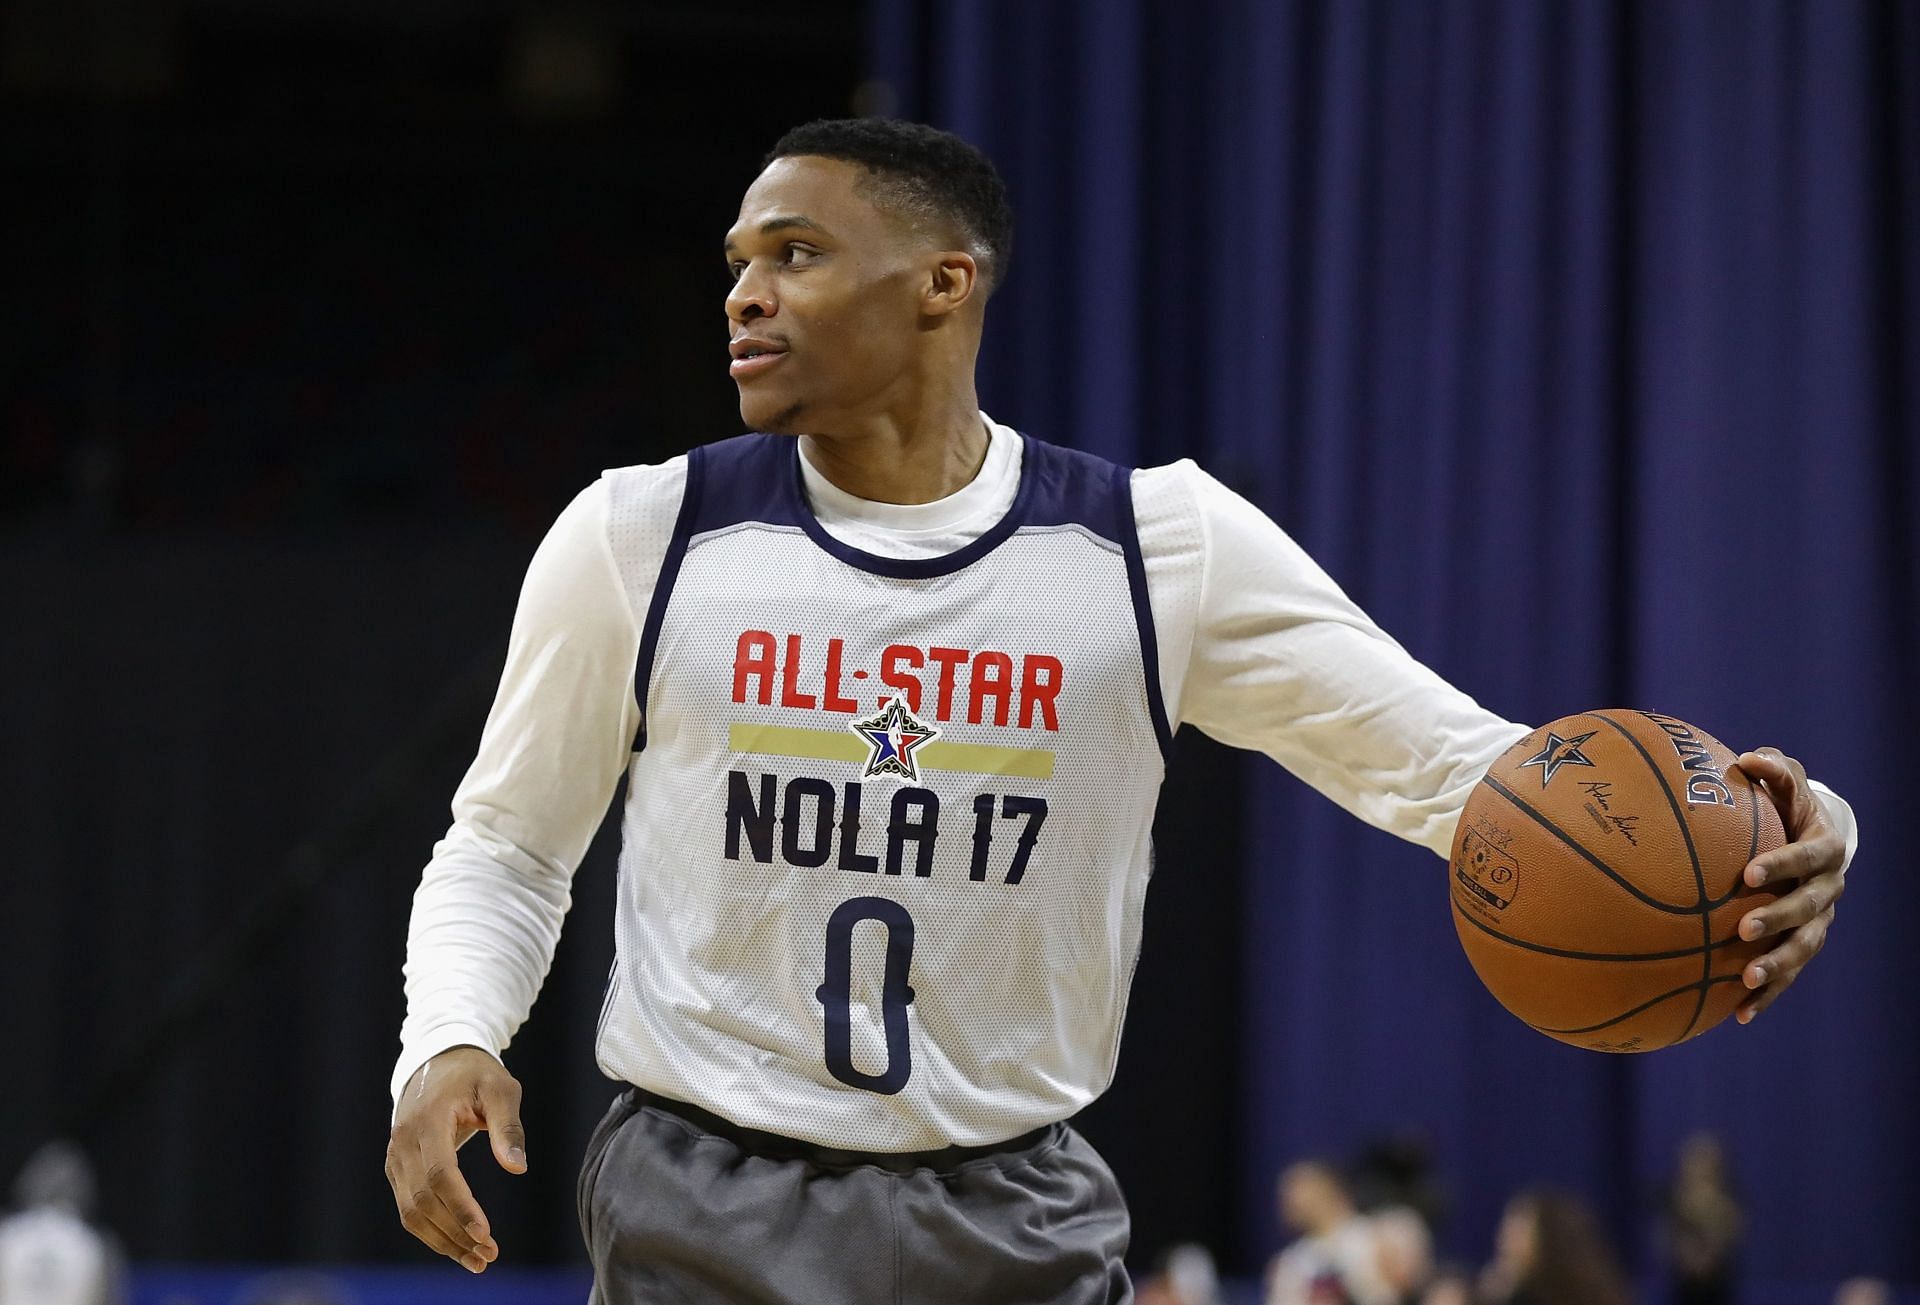 Russell Westbrook at the 2017 NBA All-Star weekend